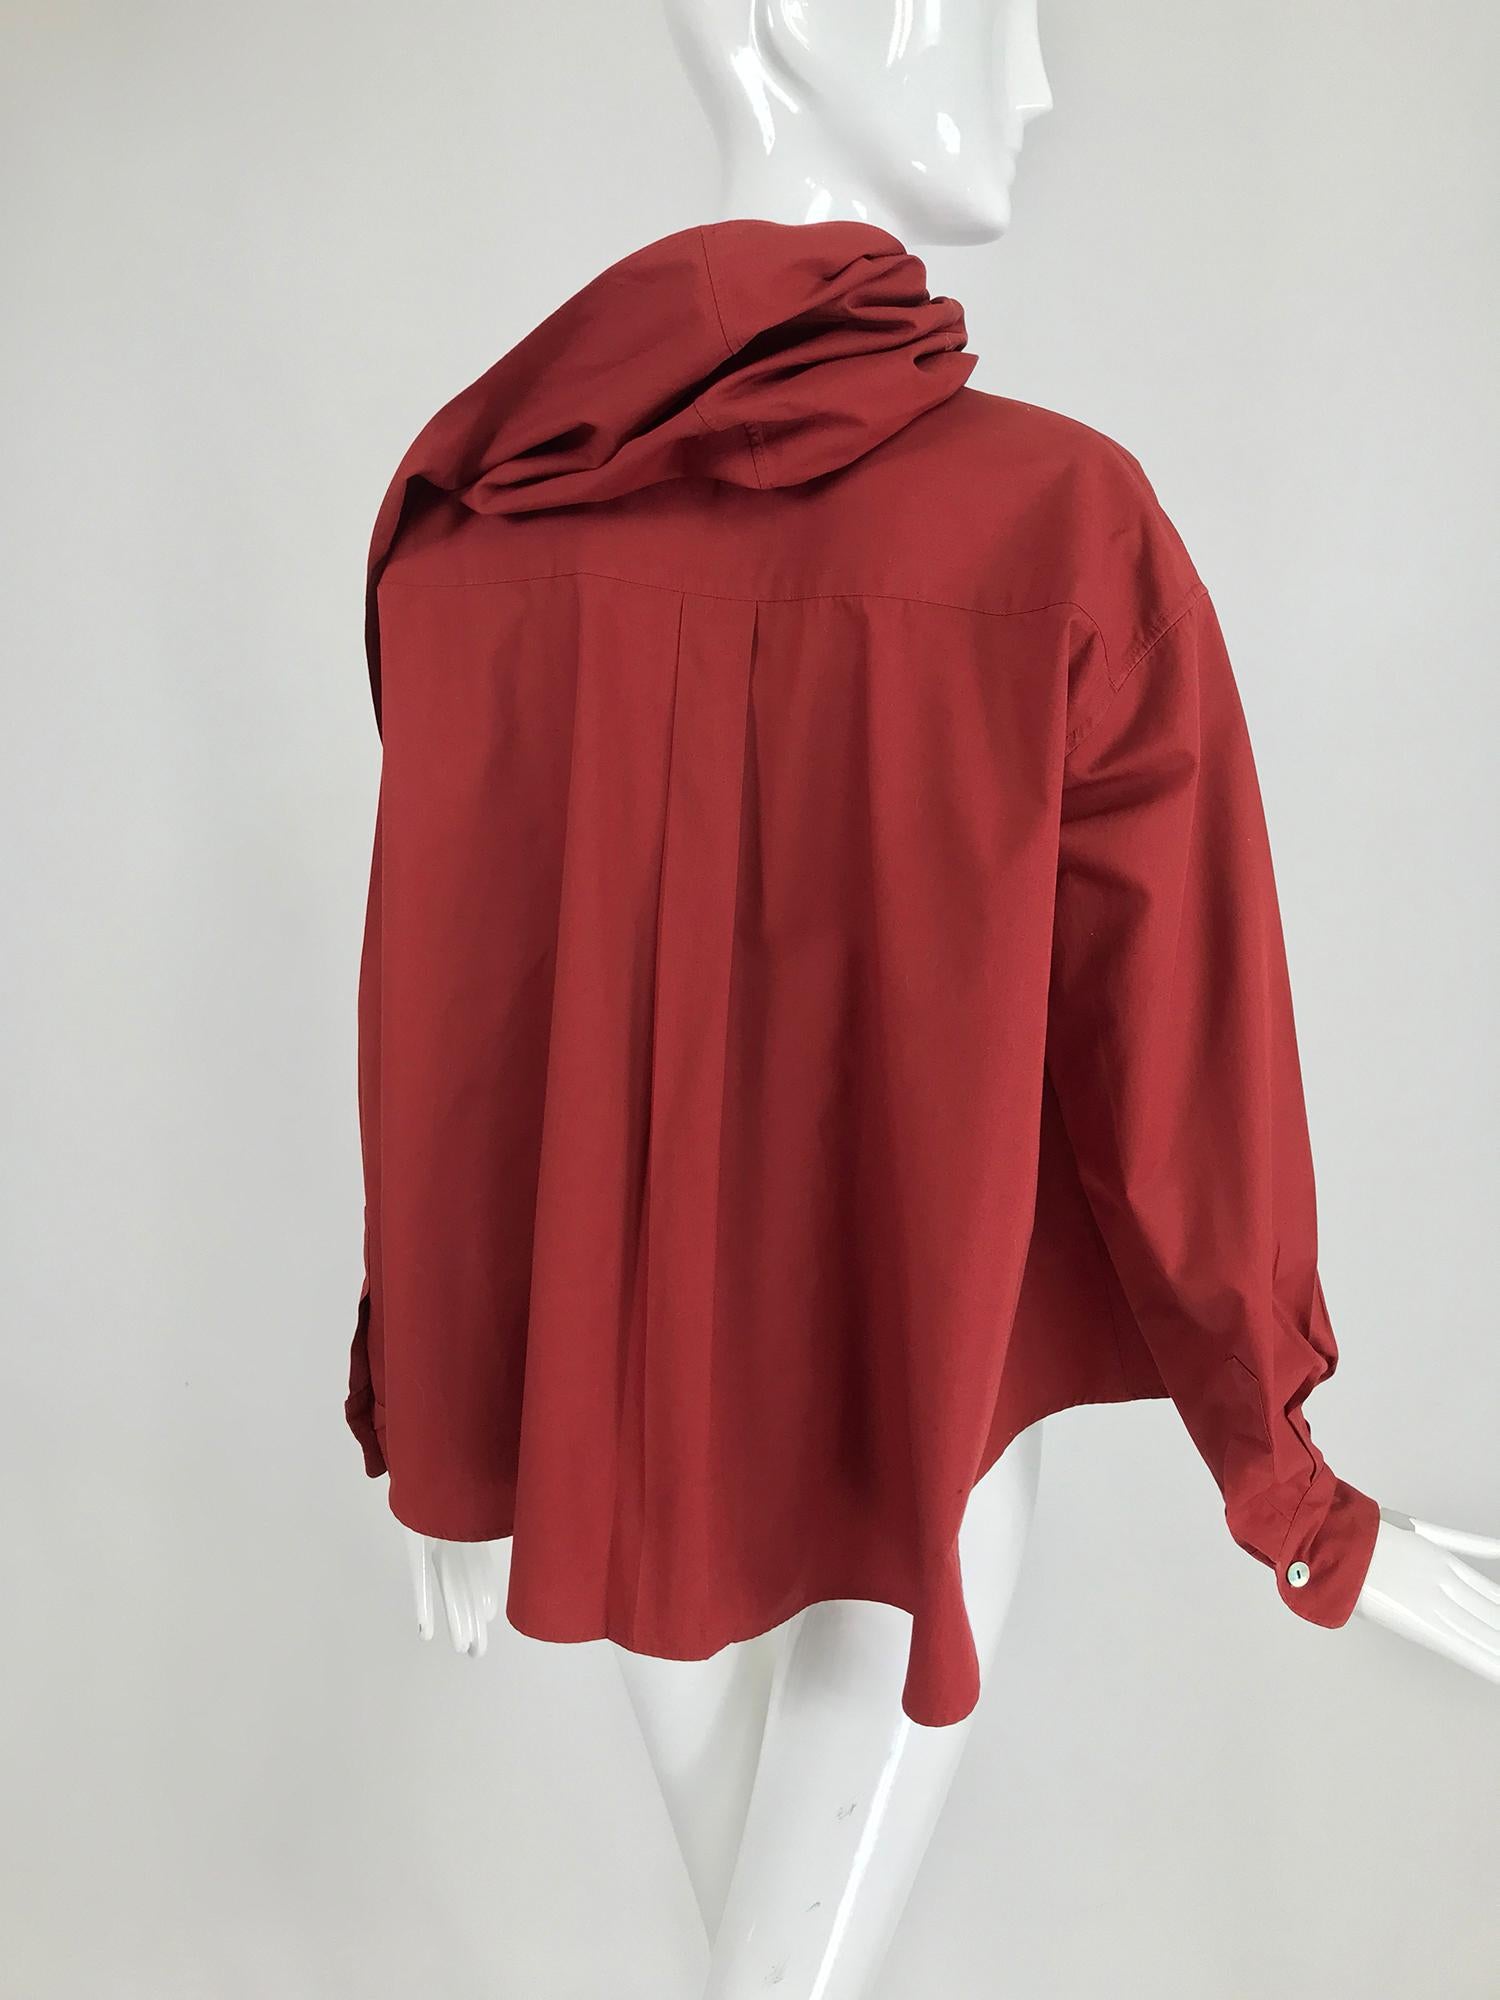 Brown Vintage Romeo Gigli Burgundy Oversize Shirt with Attached Hood Scarf 1980s